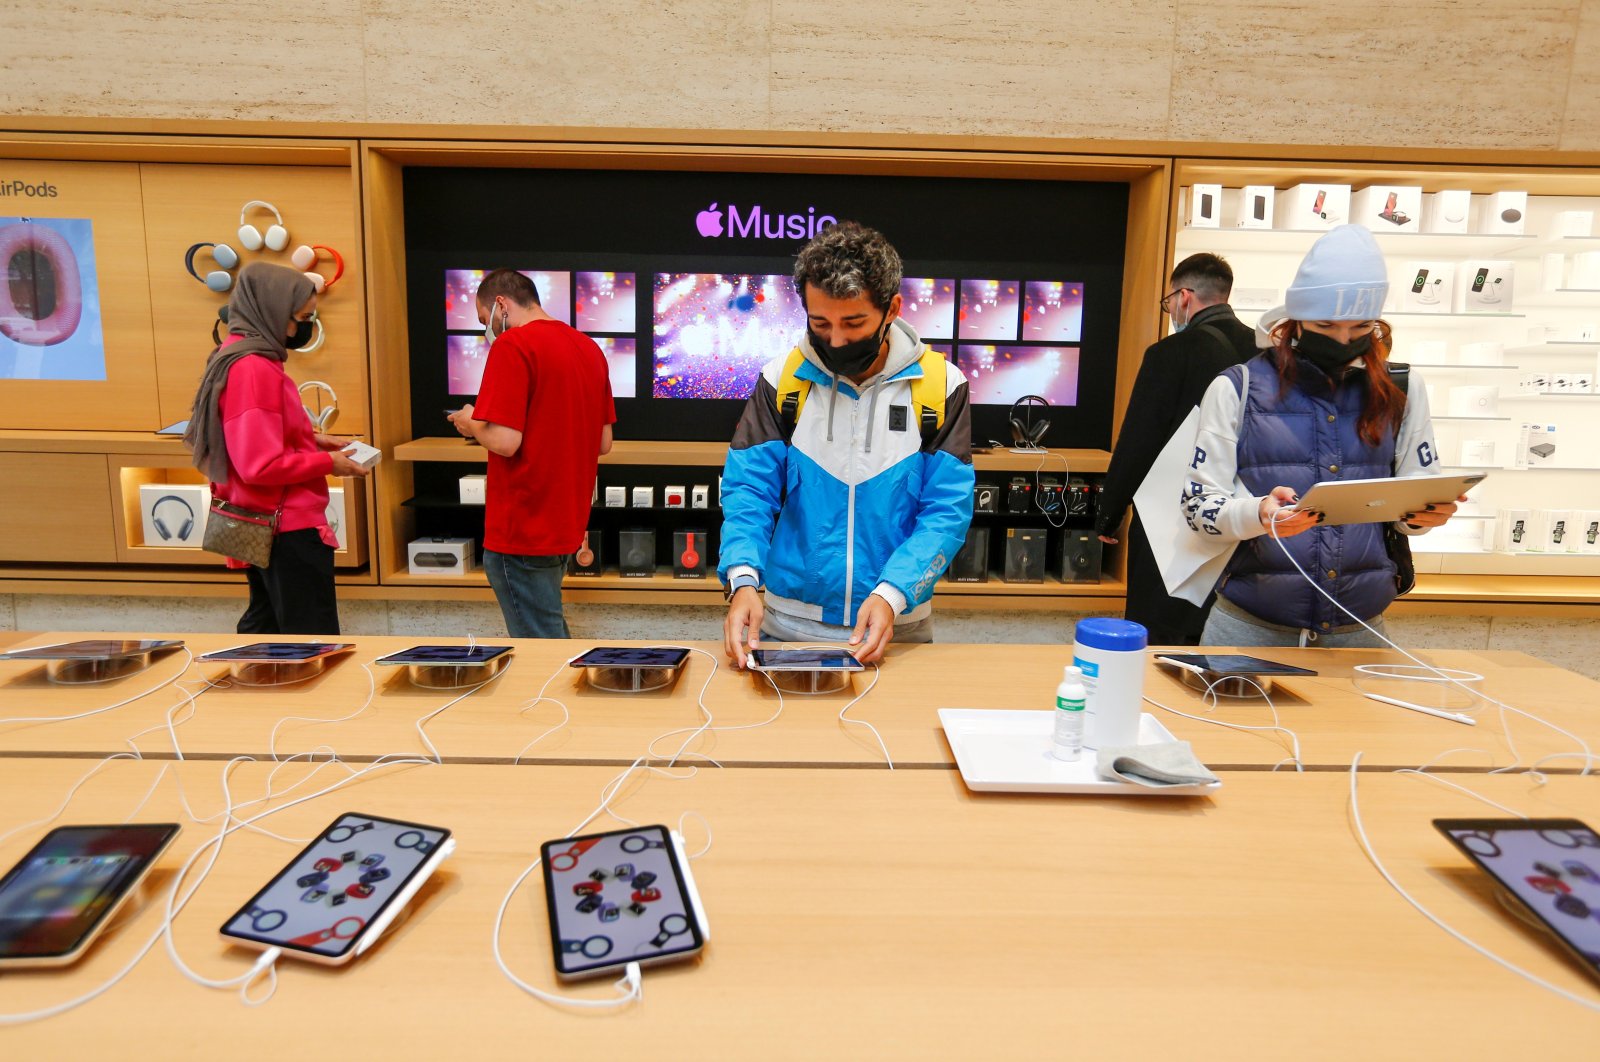 People browse products at an Apple store in Istanbul, Turkey, Nov. 24, 2021. (Reuters Photo)